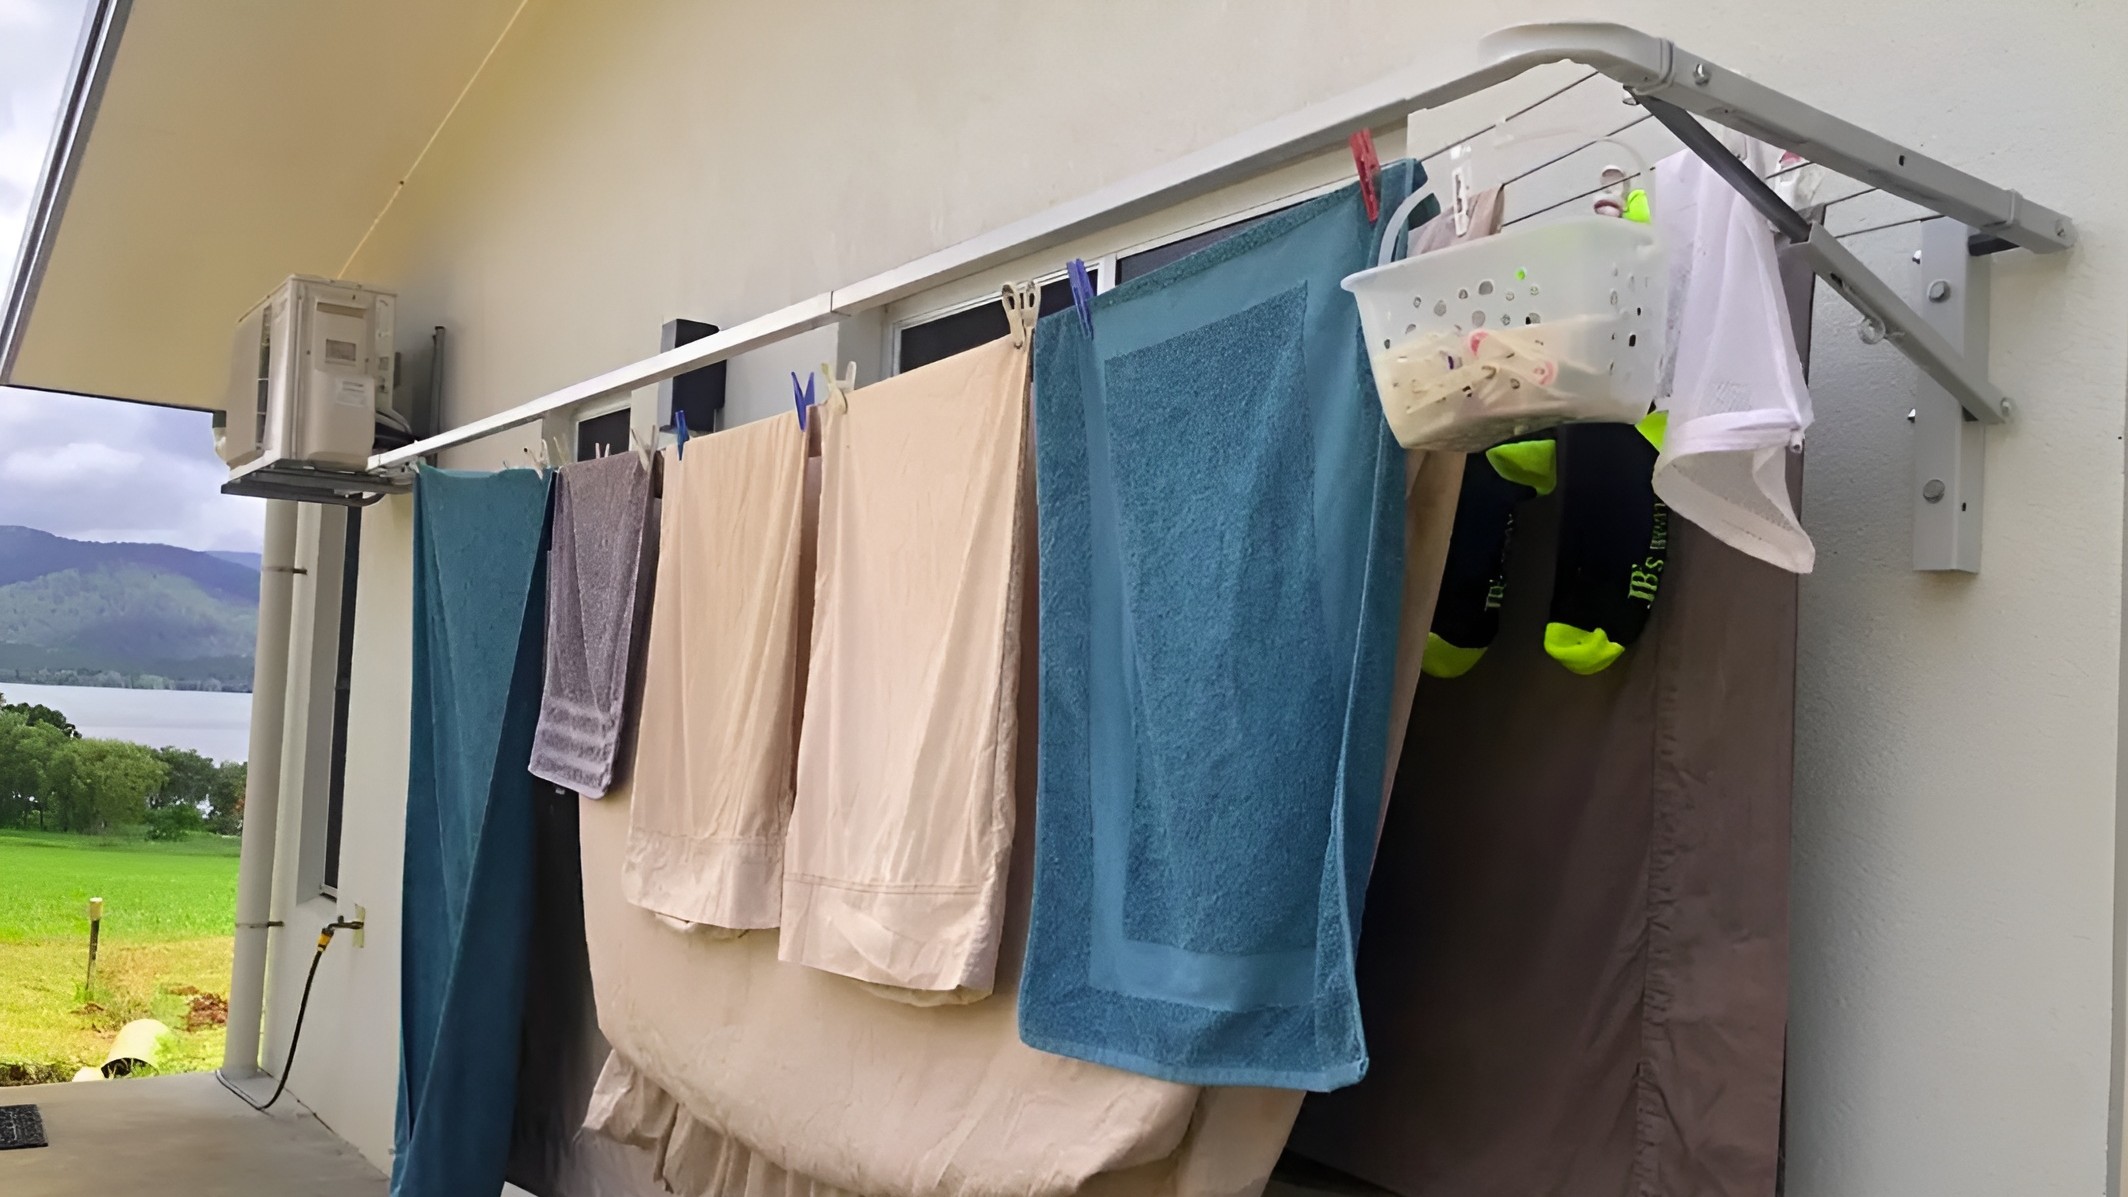 Top 7 Heavy Duty Wall Mounted Washing Line in Australia: Sturdy & Spacious Solutions for Your Laundry Needs